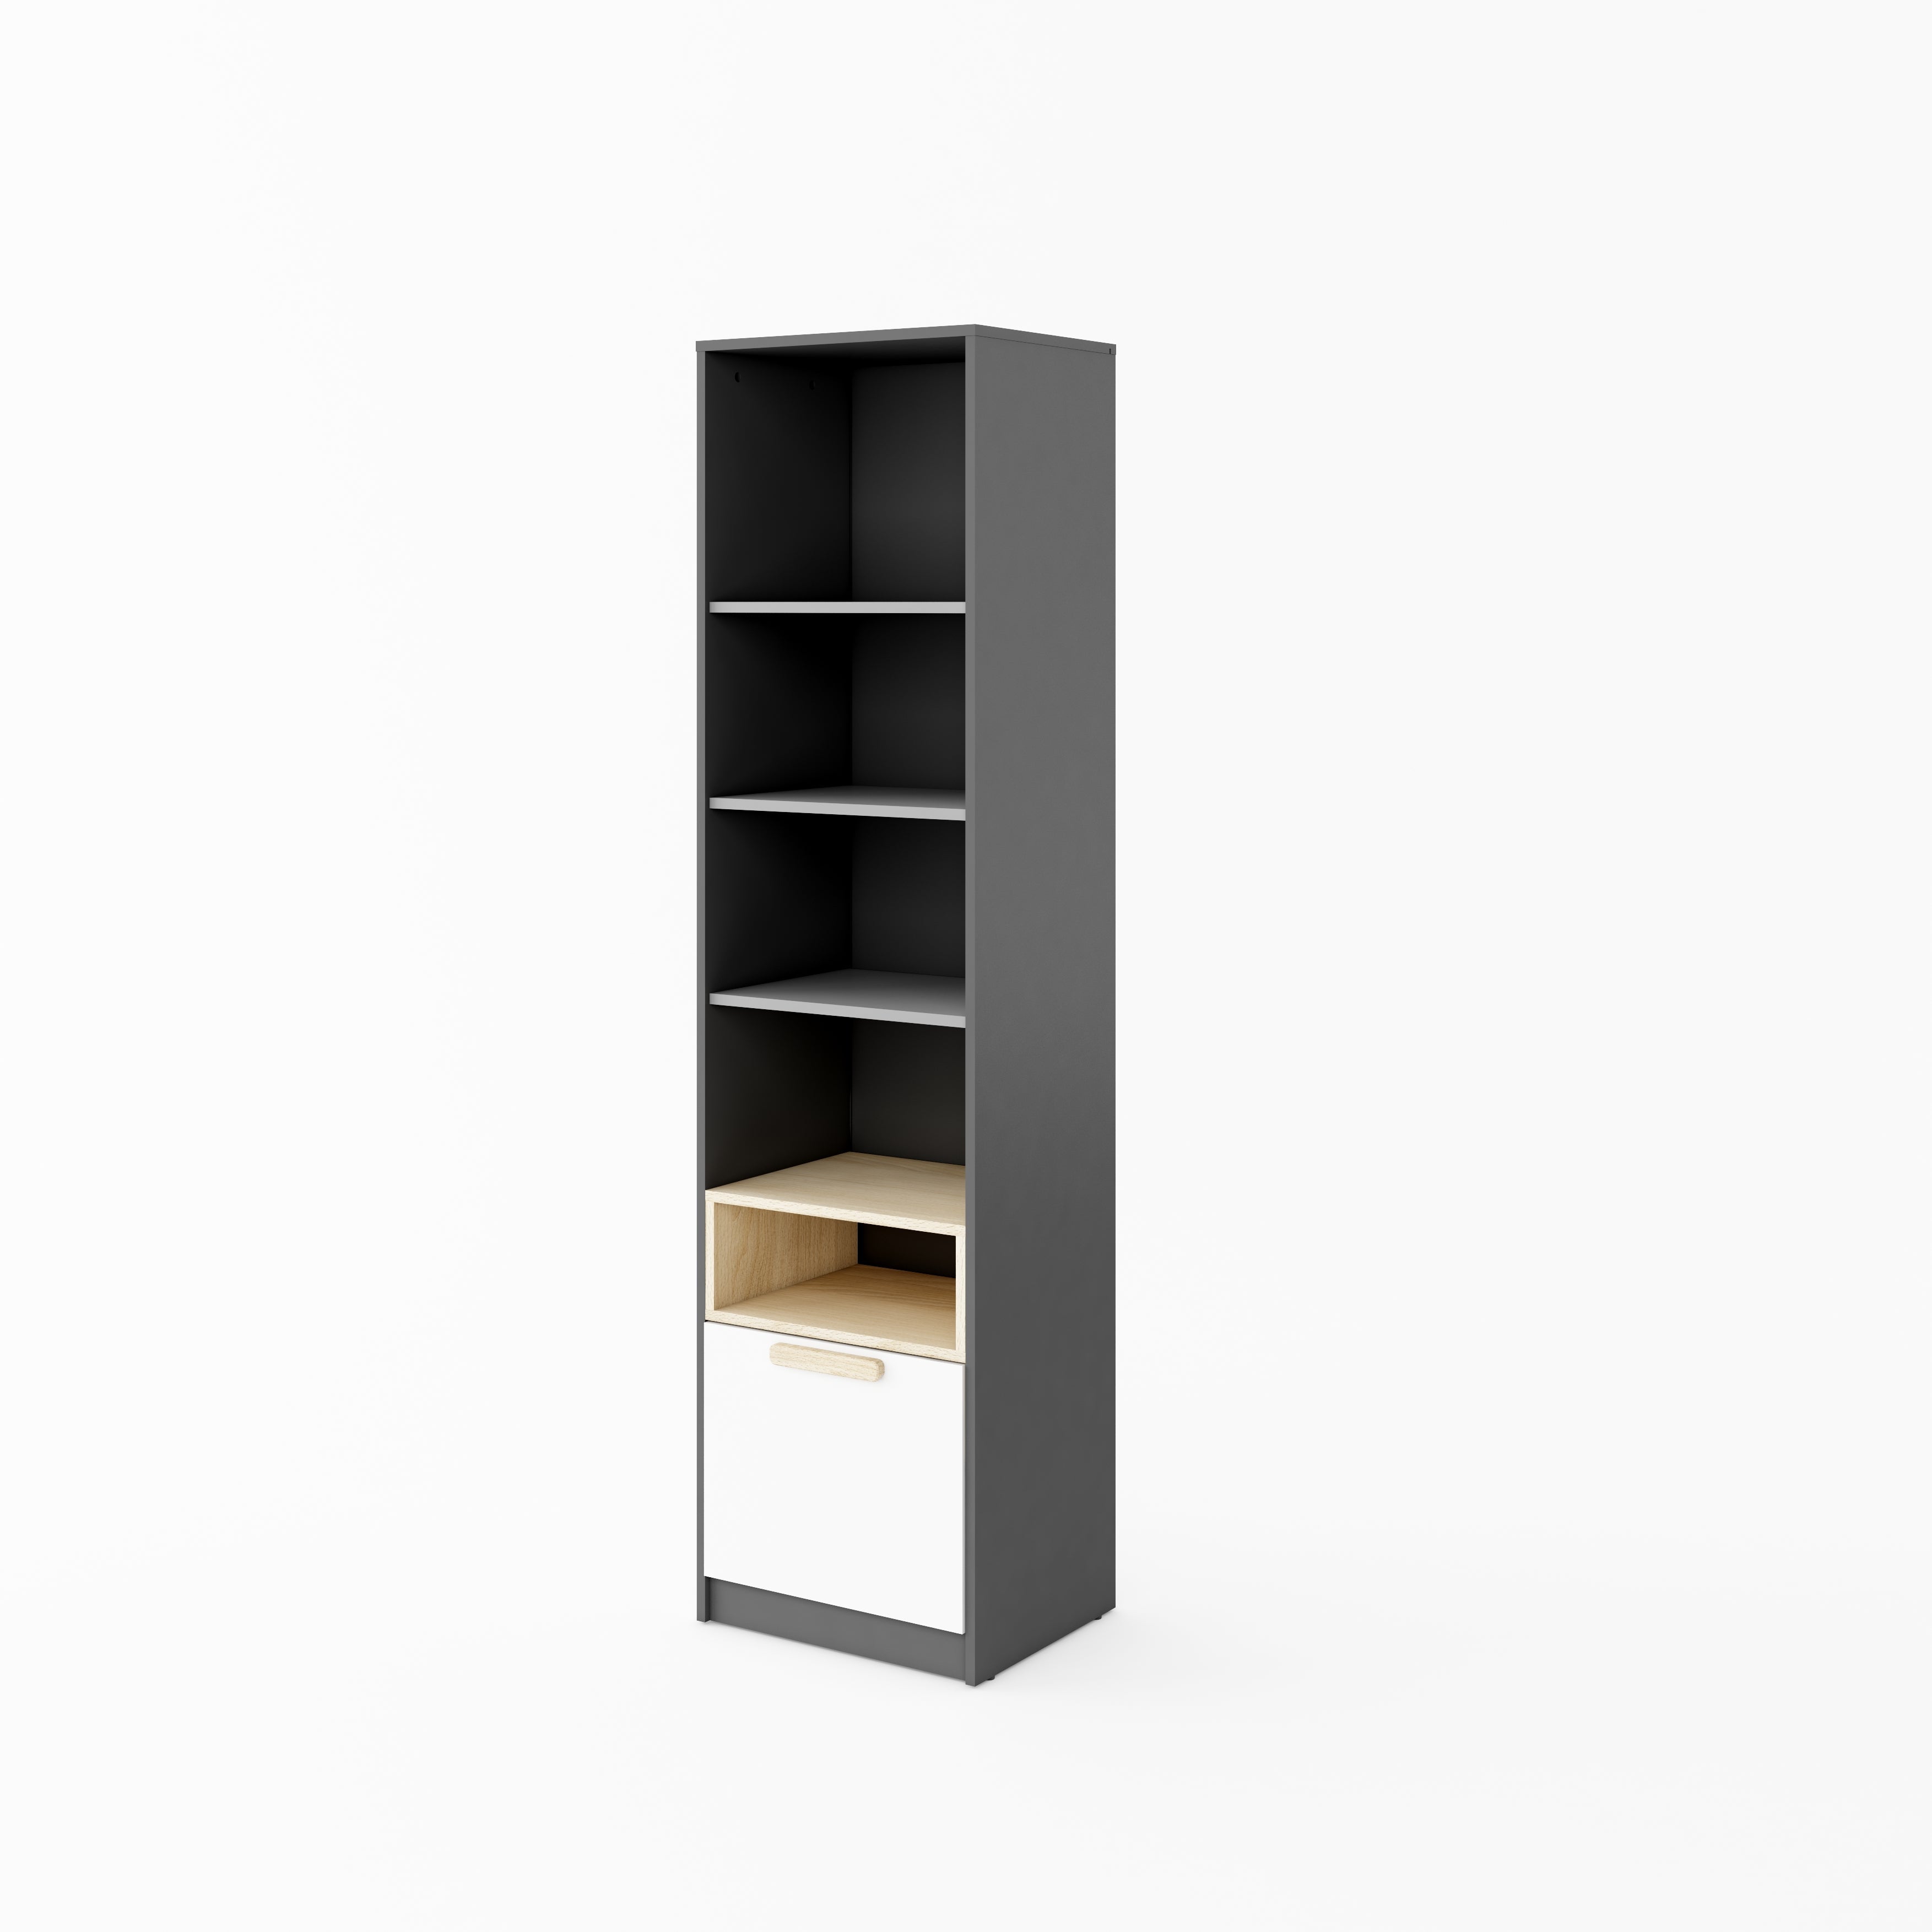 View Pok PO04 Display Tall Cabinet information